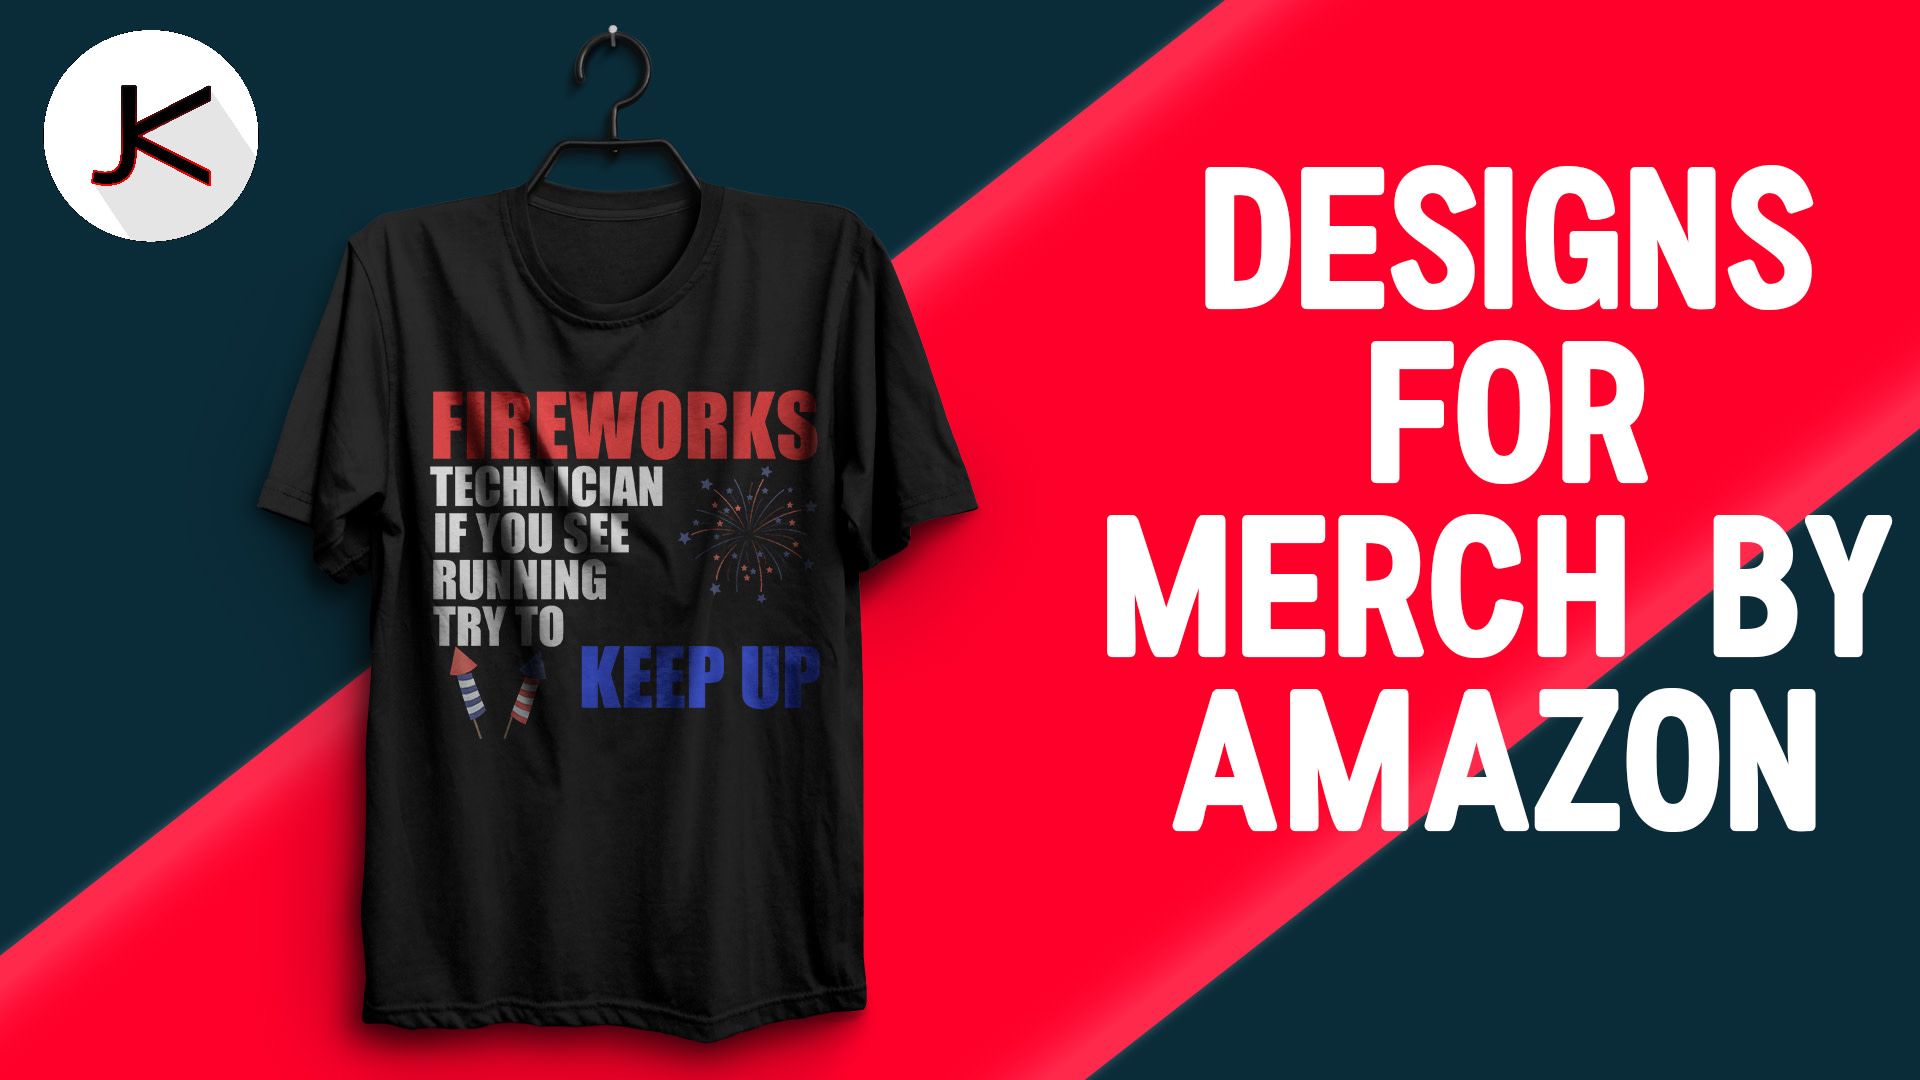 Design awesome for merch by Jahanzaib222 | Fiverr